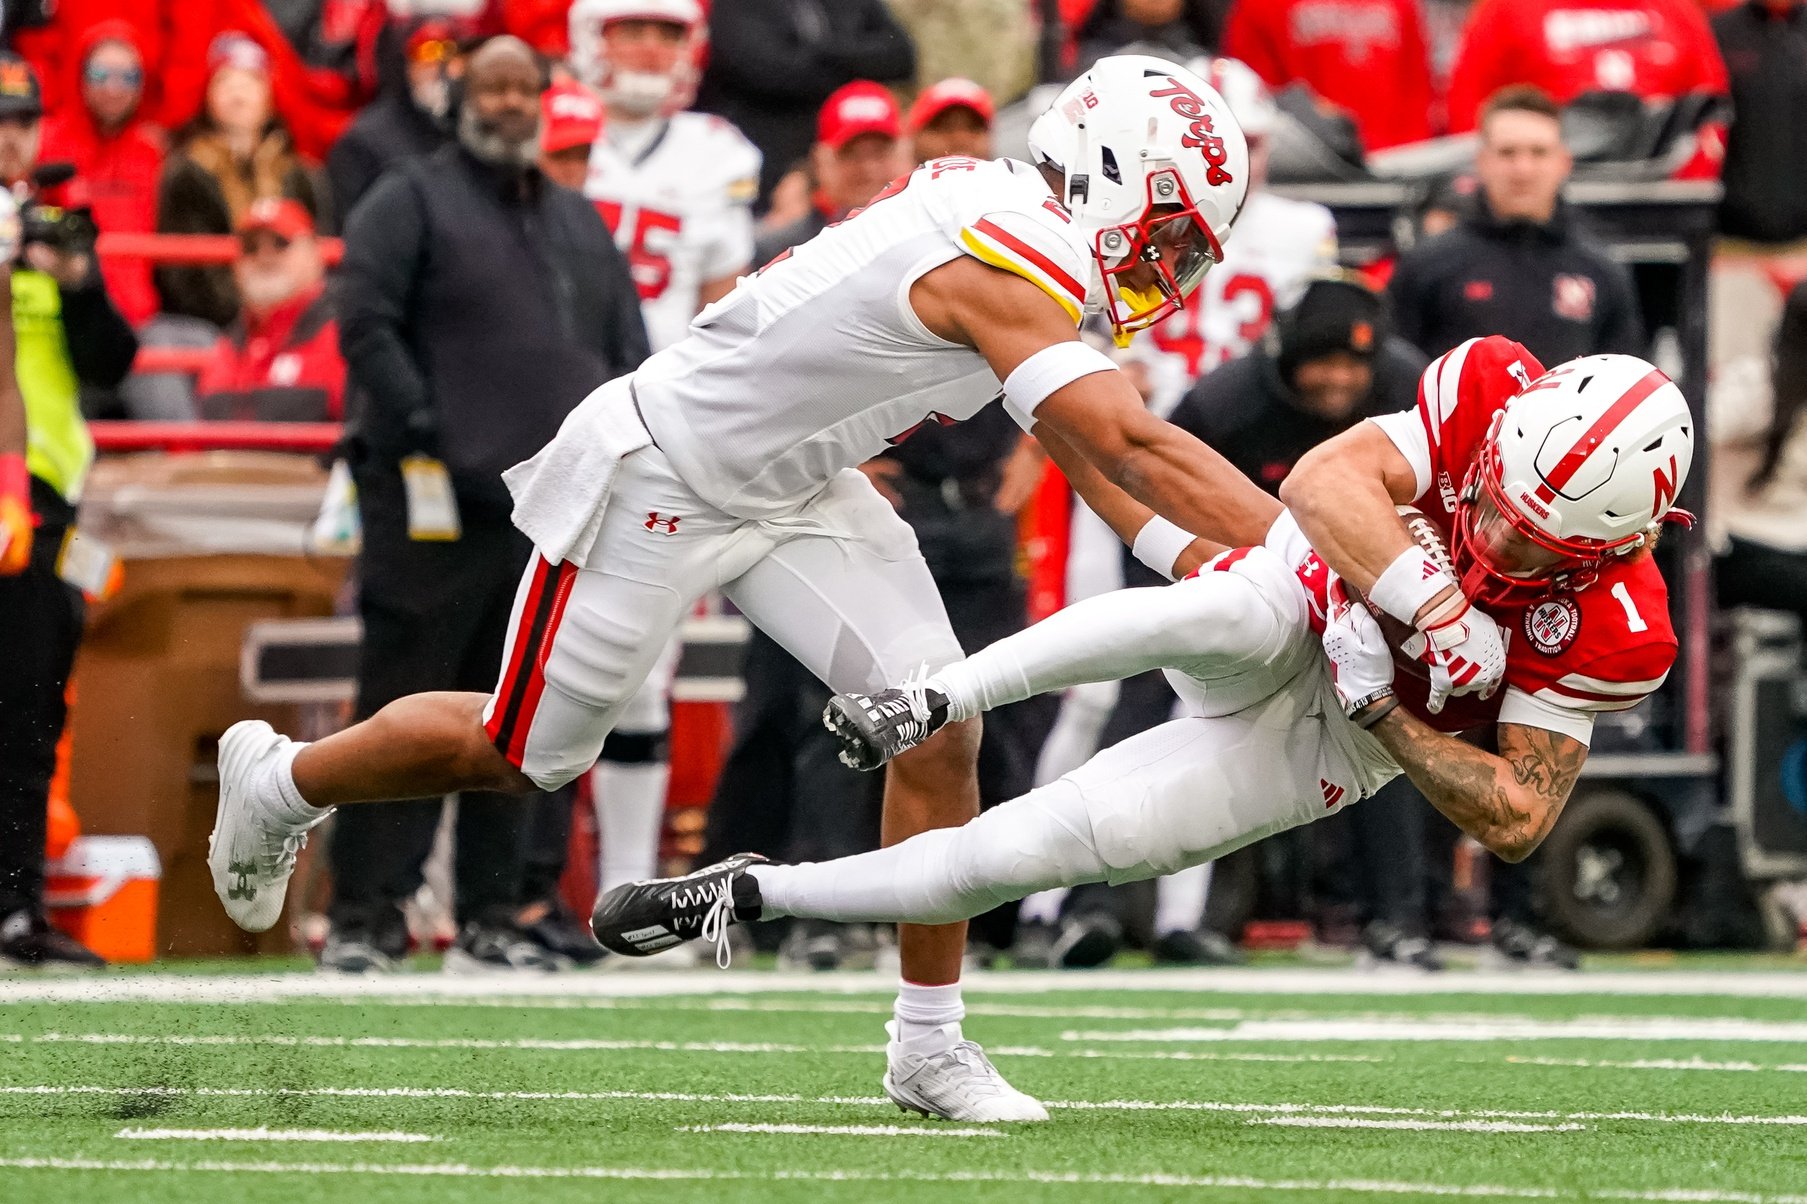 Nebraska Cornhuskers wide receiver Billy Kemp IV (1) is brought down by Maryland Terrapins defensive back Beau Brade (2) during the second quarter at Memorial Stadium.